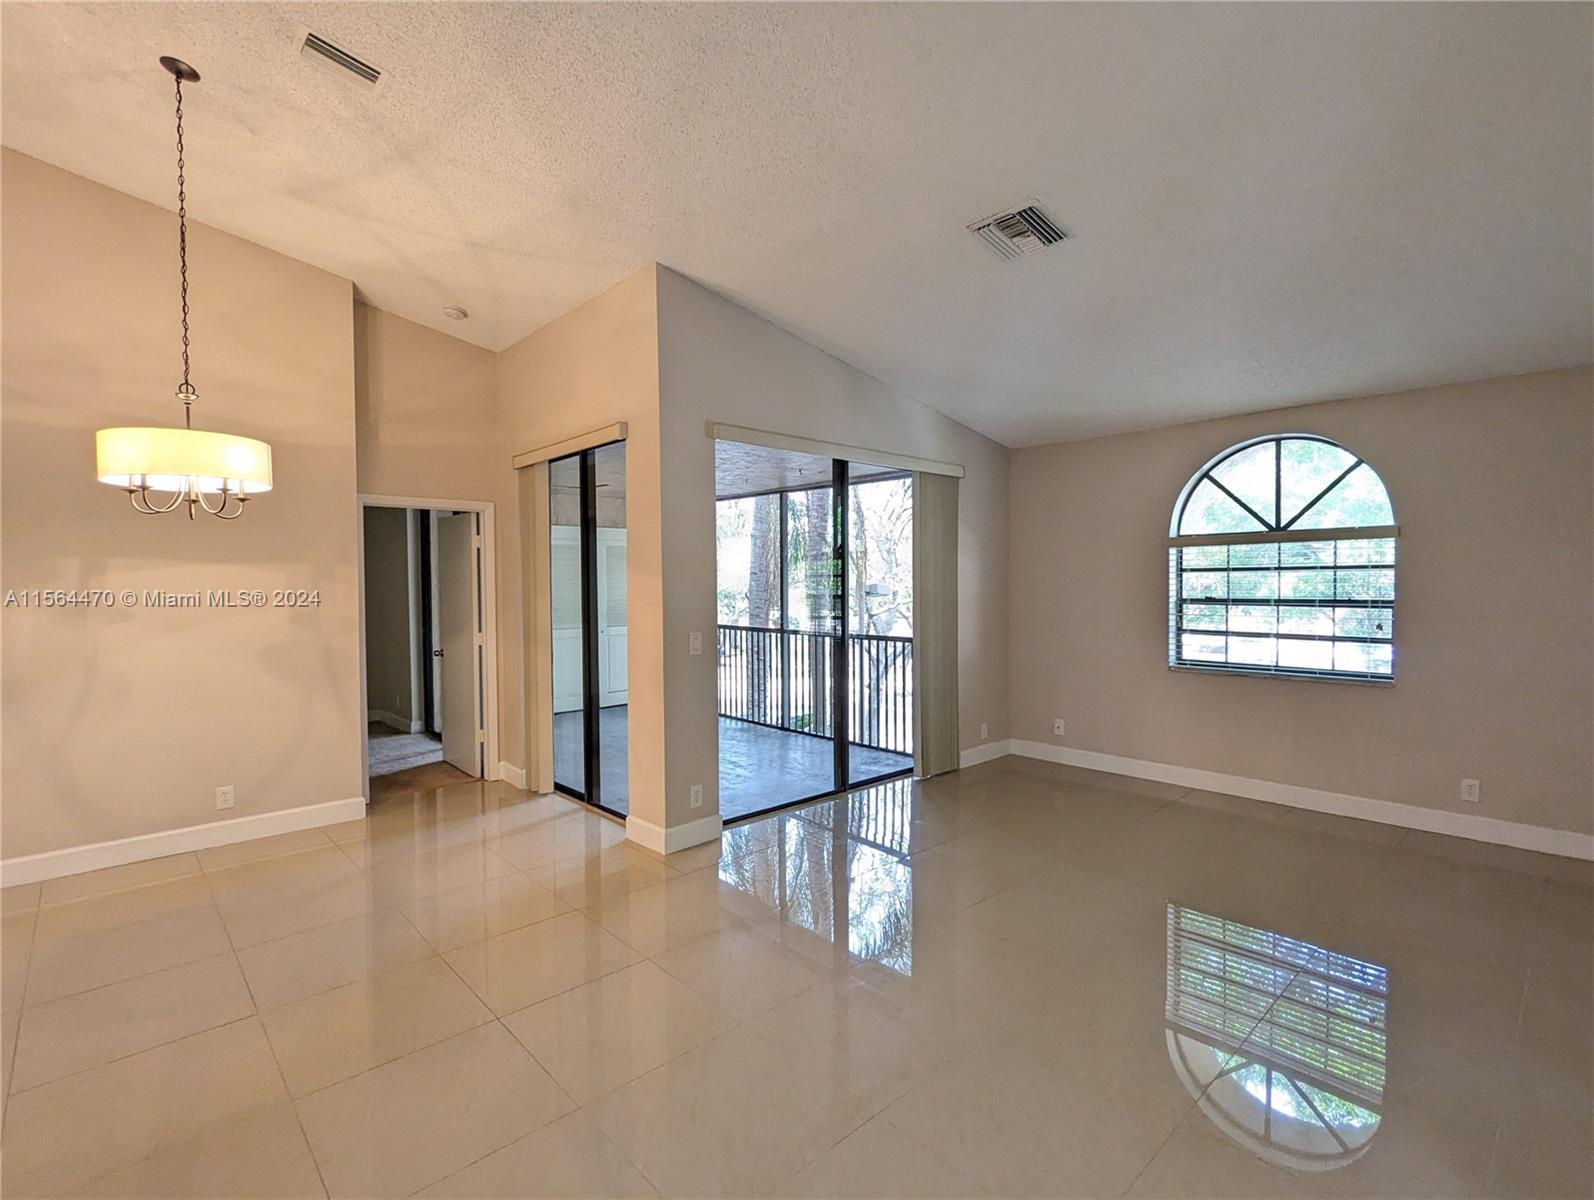 Photo of 10700 NW 14th St #142 in Plantation, FL